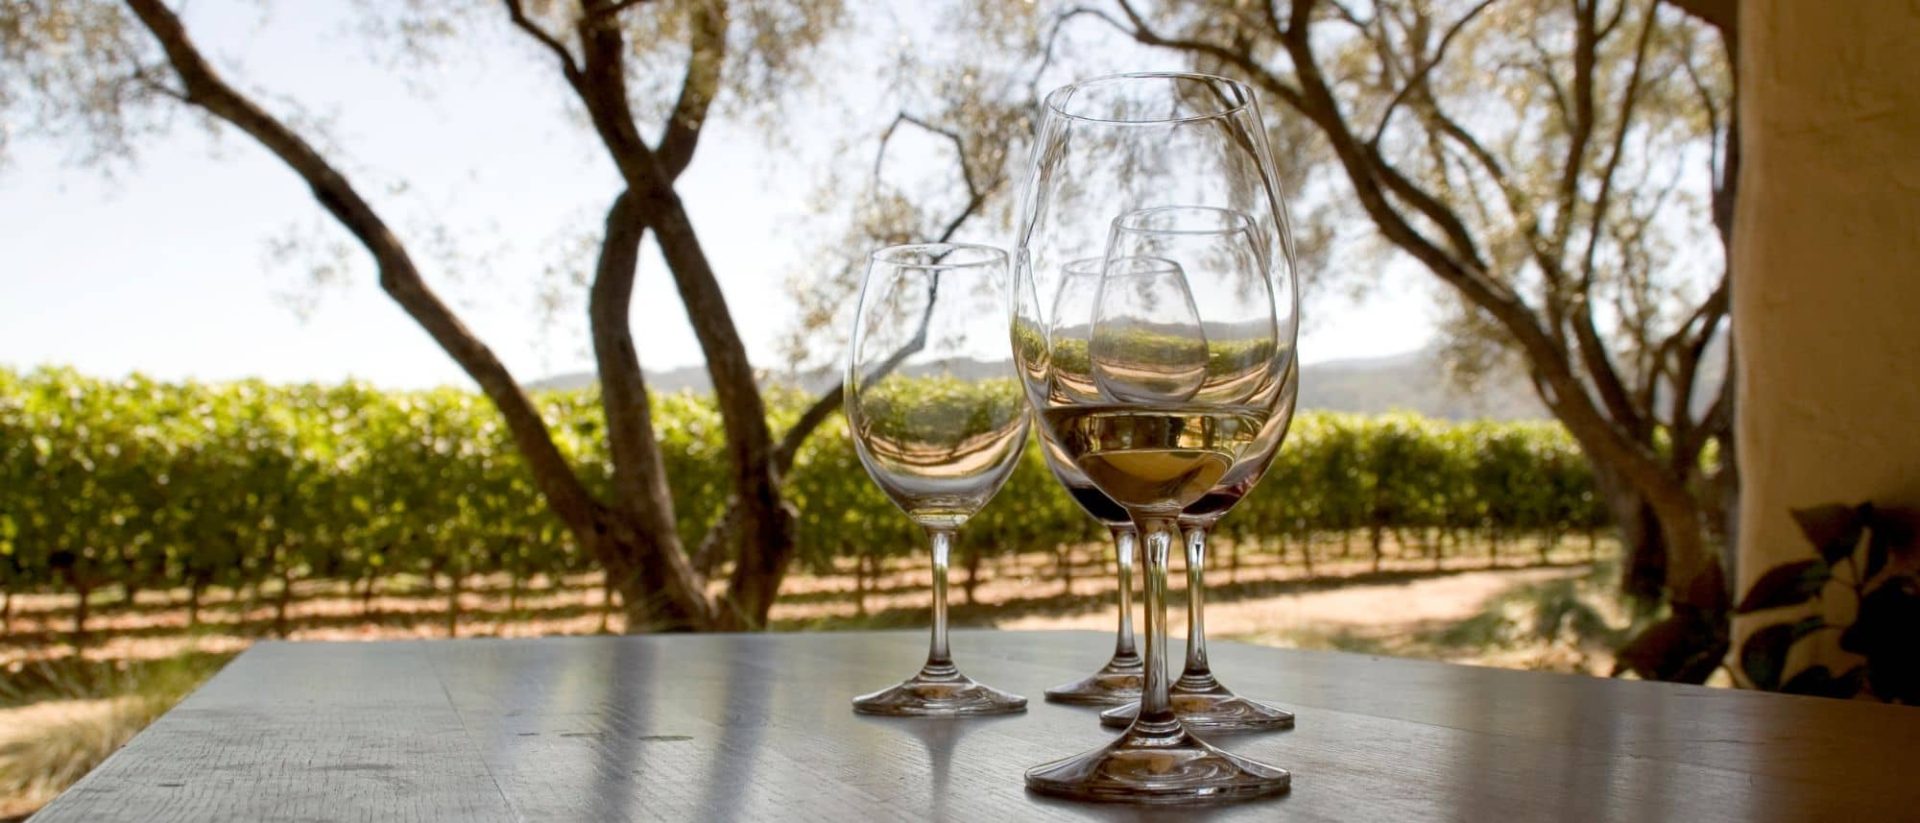 Three wine glasses sitting on a table in front of trees.